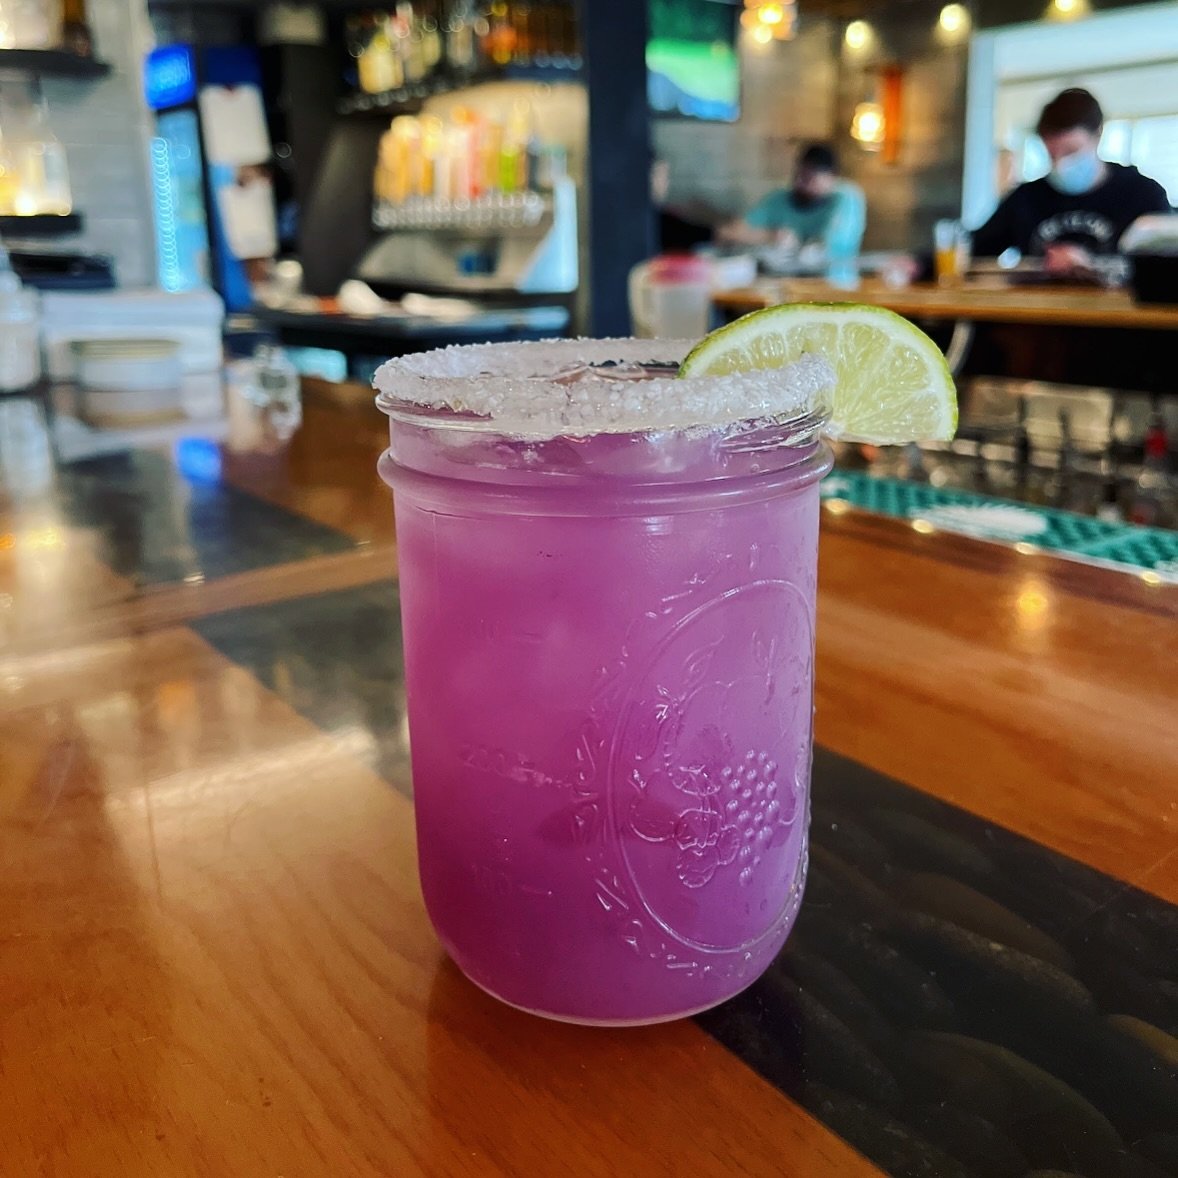 ✨ It&rsquo;s a new month and a new Margarita for May! ✨ 
Welcome back to the Lavender Lemonade Margarita. This baby is made with house infused tequila (which means it&rsquo;s delicious and also can&rsquo;t be a mocktail or upgraded to another tequila